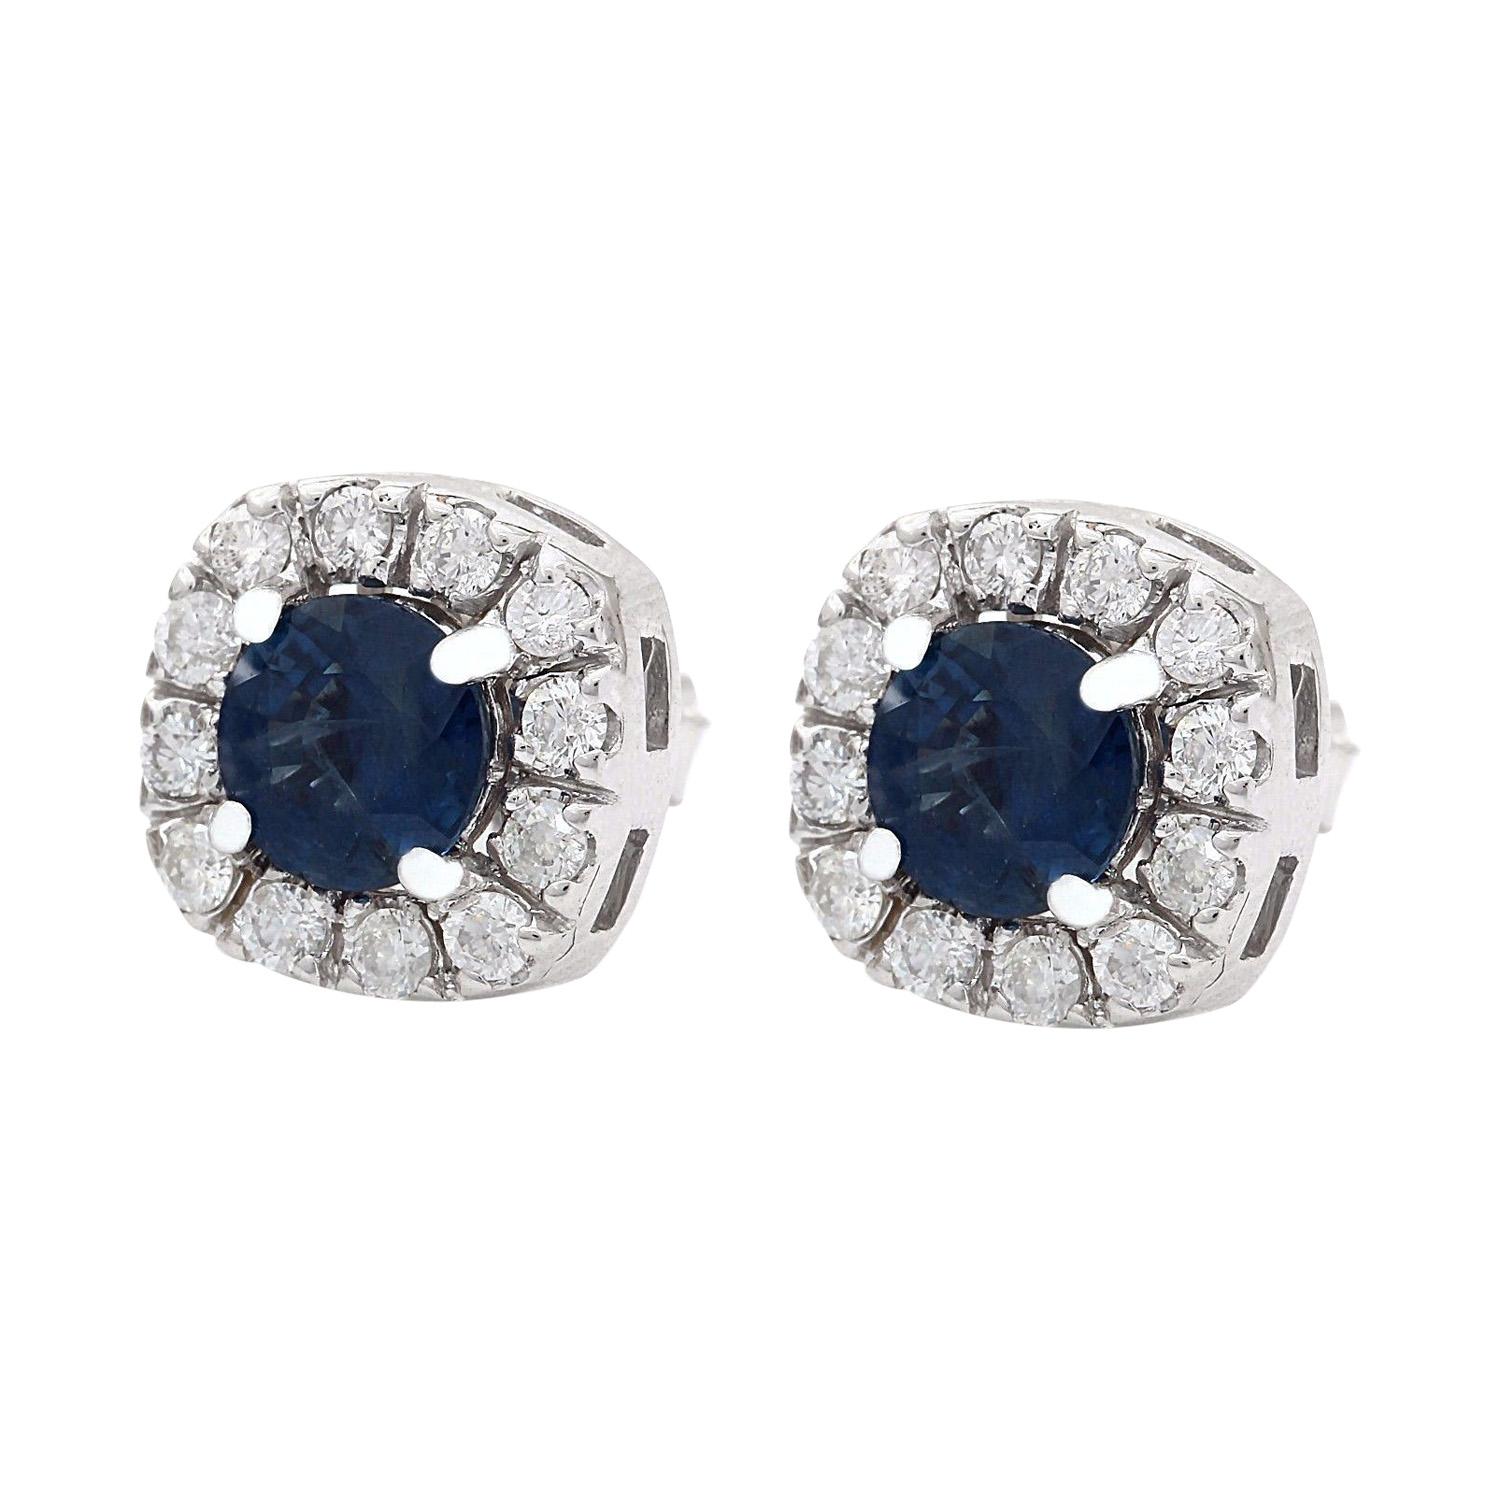 2.13 Carat Natural Sapphire 14K Solid White Gold Diamond Stud Earrings
 Item Type: Earrings
 Item Style: Stud
 Item Length: 10.00 mm
 Item Width: 10.00 mm
 Material: 14K White Gold
 Mainstone: Ceylon Sapphire
 Stone Color: Blue
 Stone Weight: 1.68